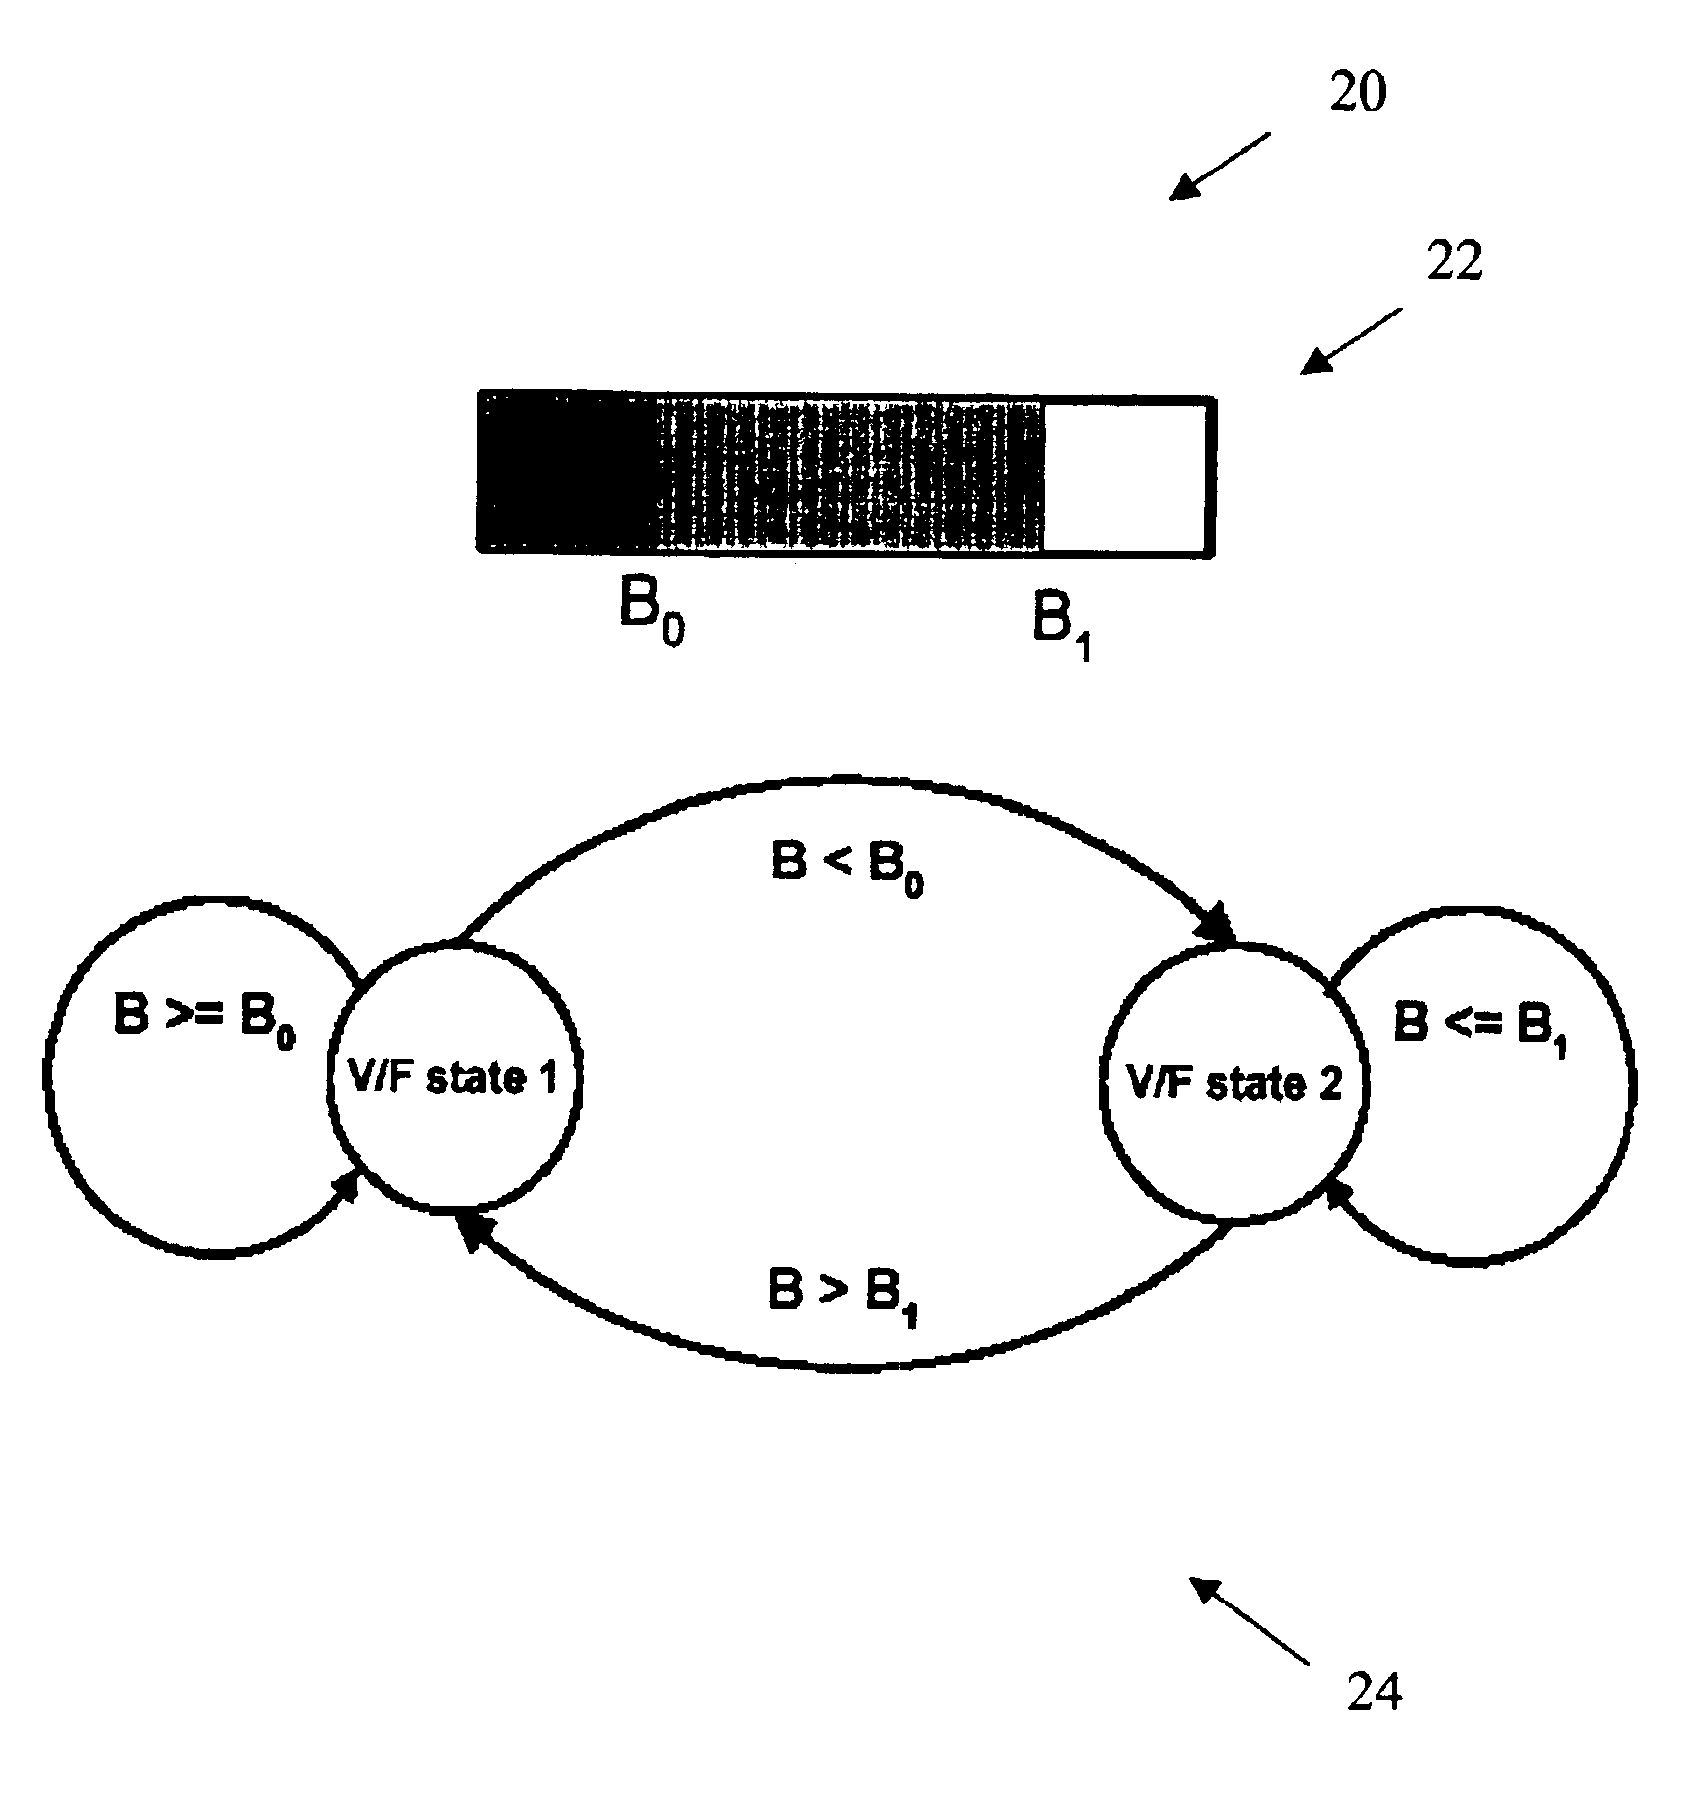 System and method for dynamic power management using data buffer levels